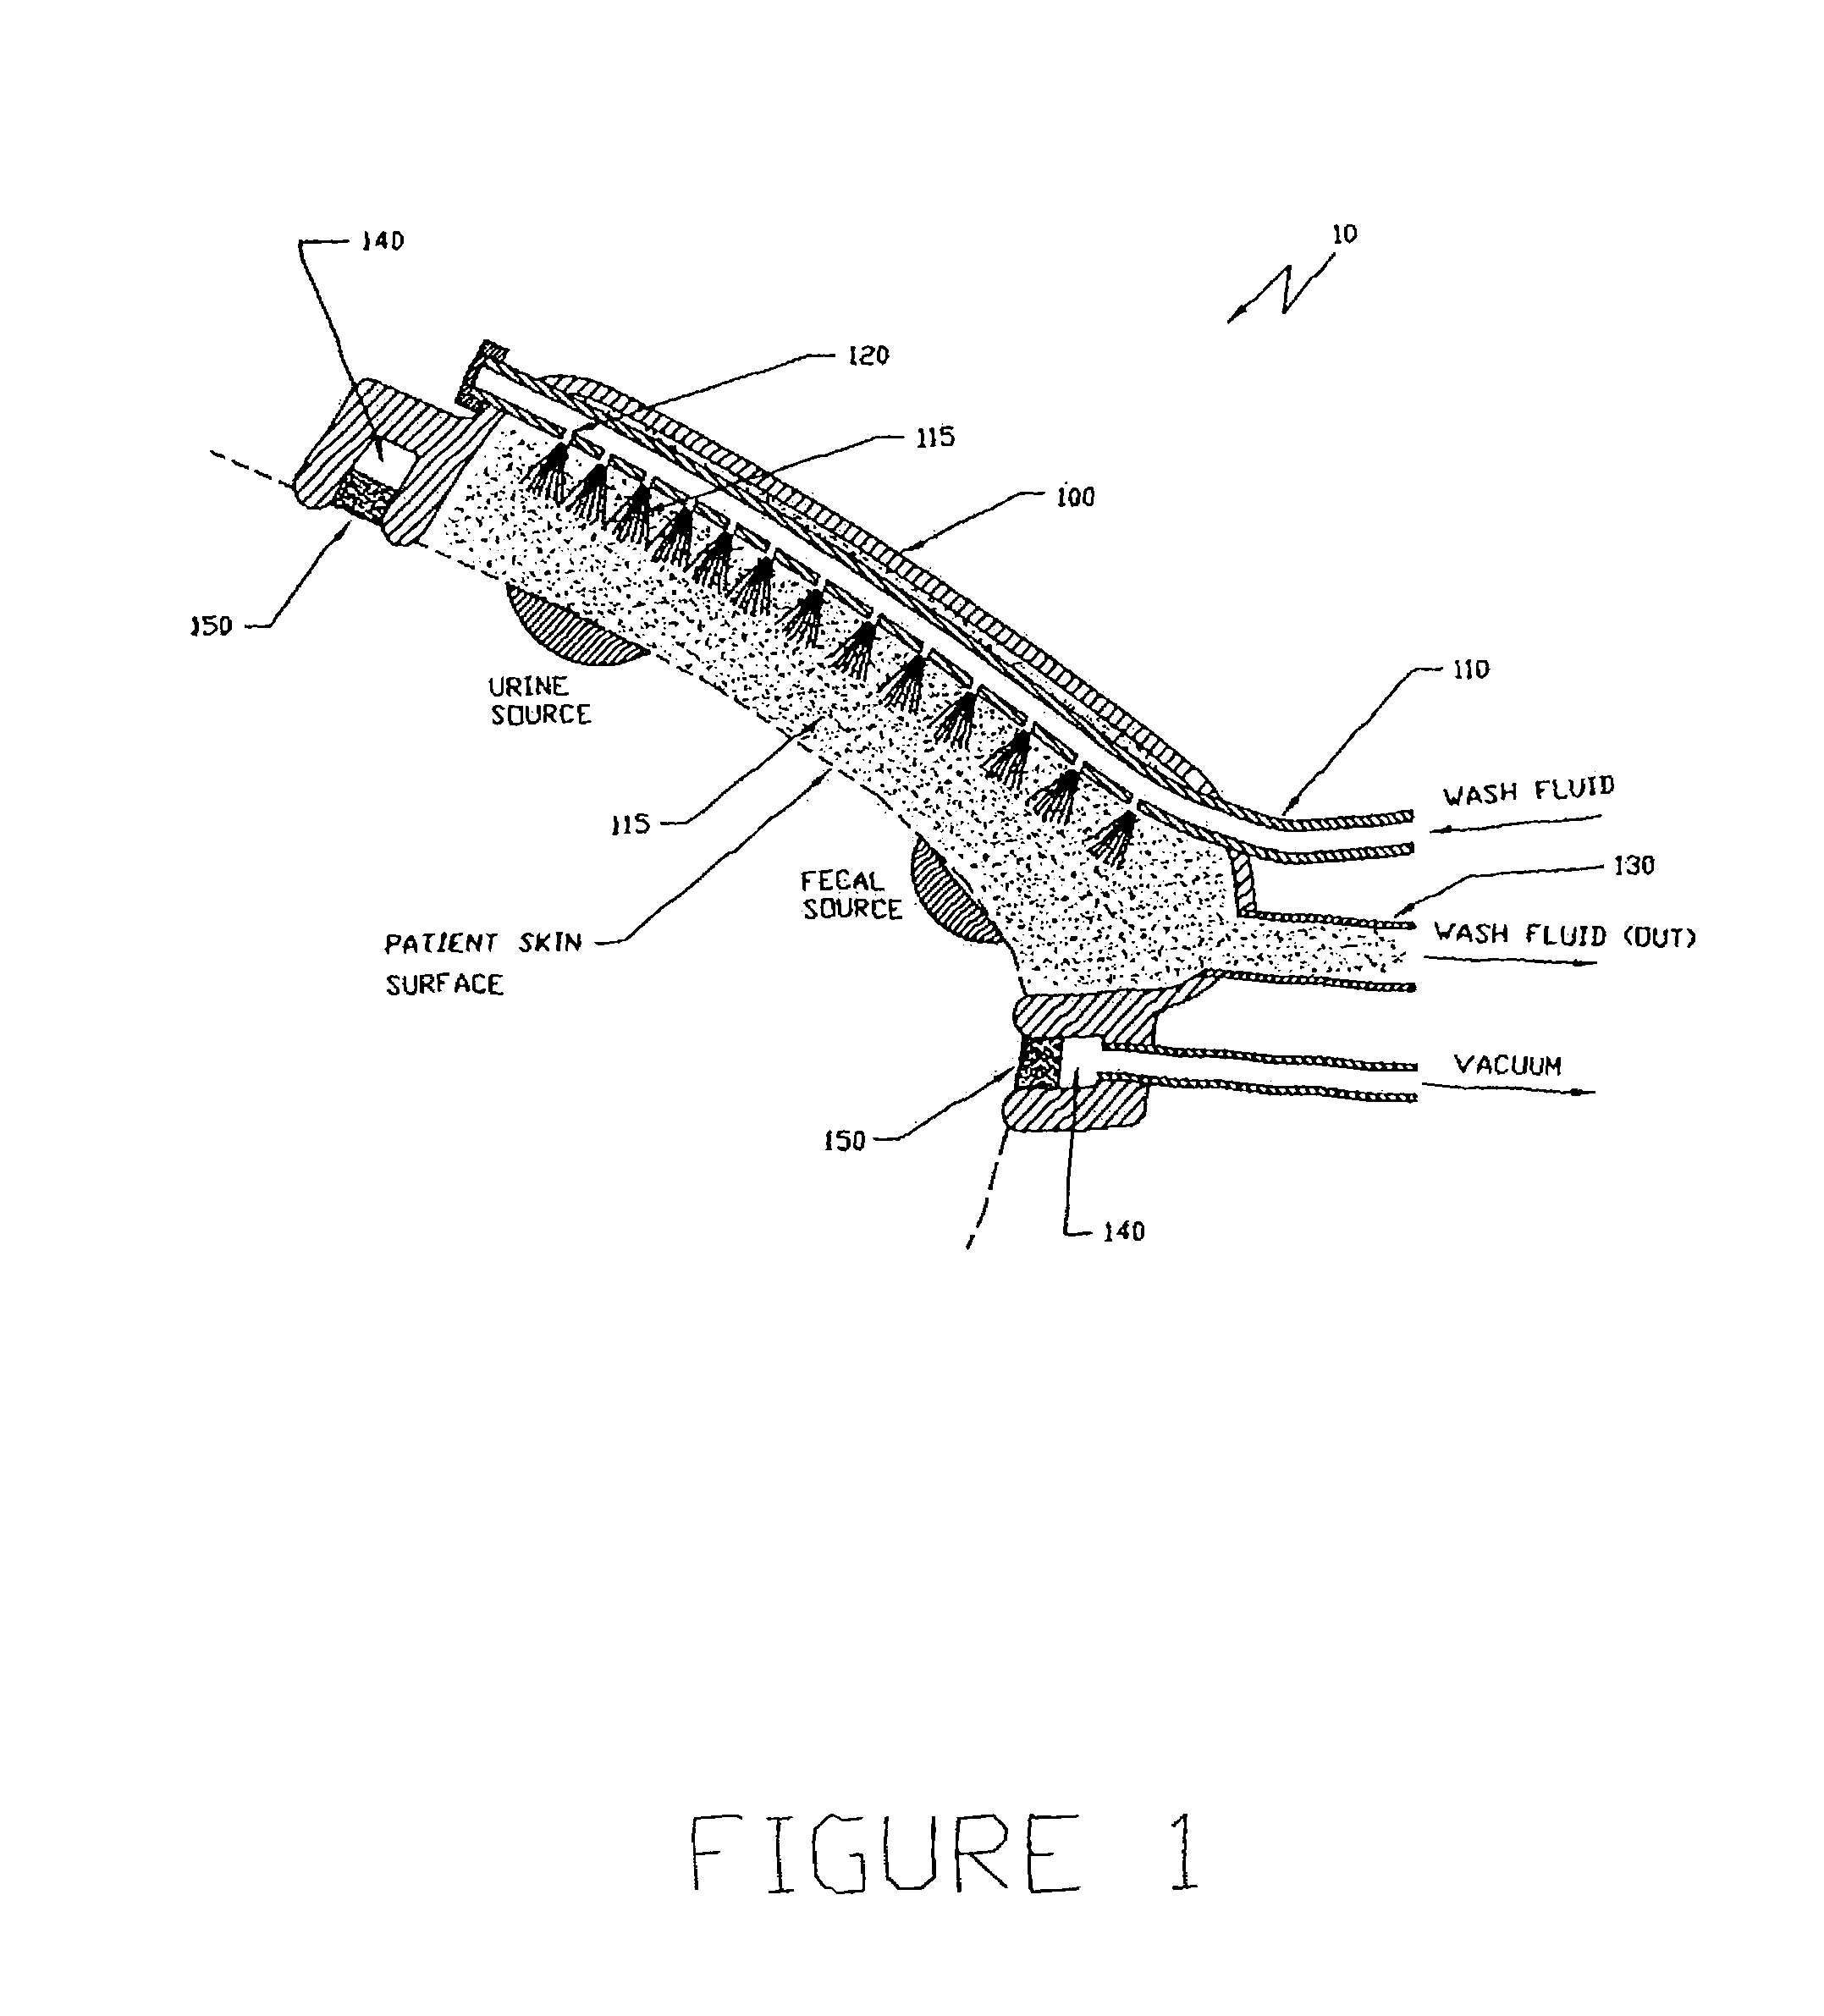 Apparatus and method for the removal and containment of human waste excretion